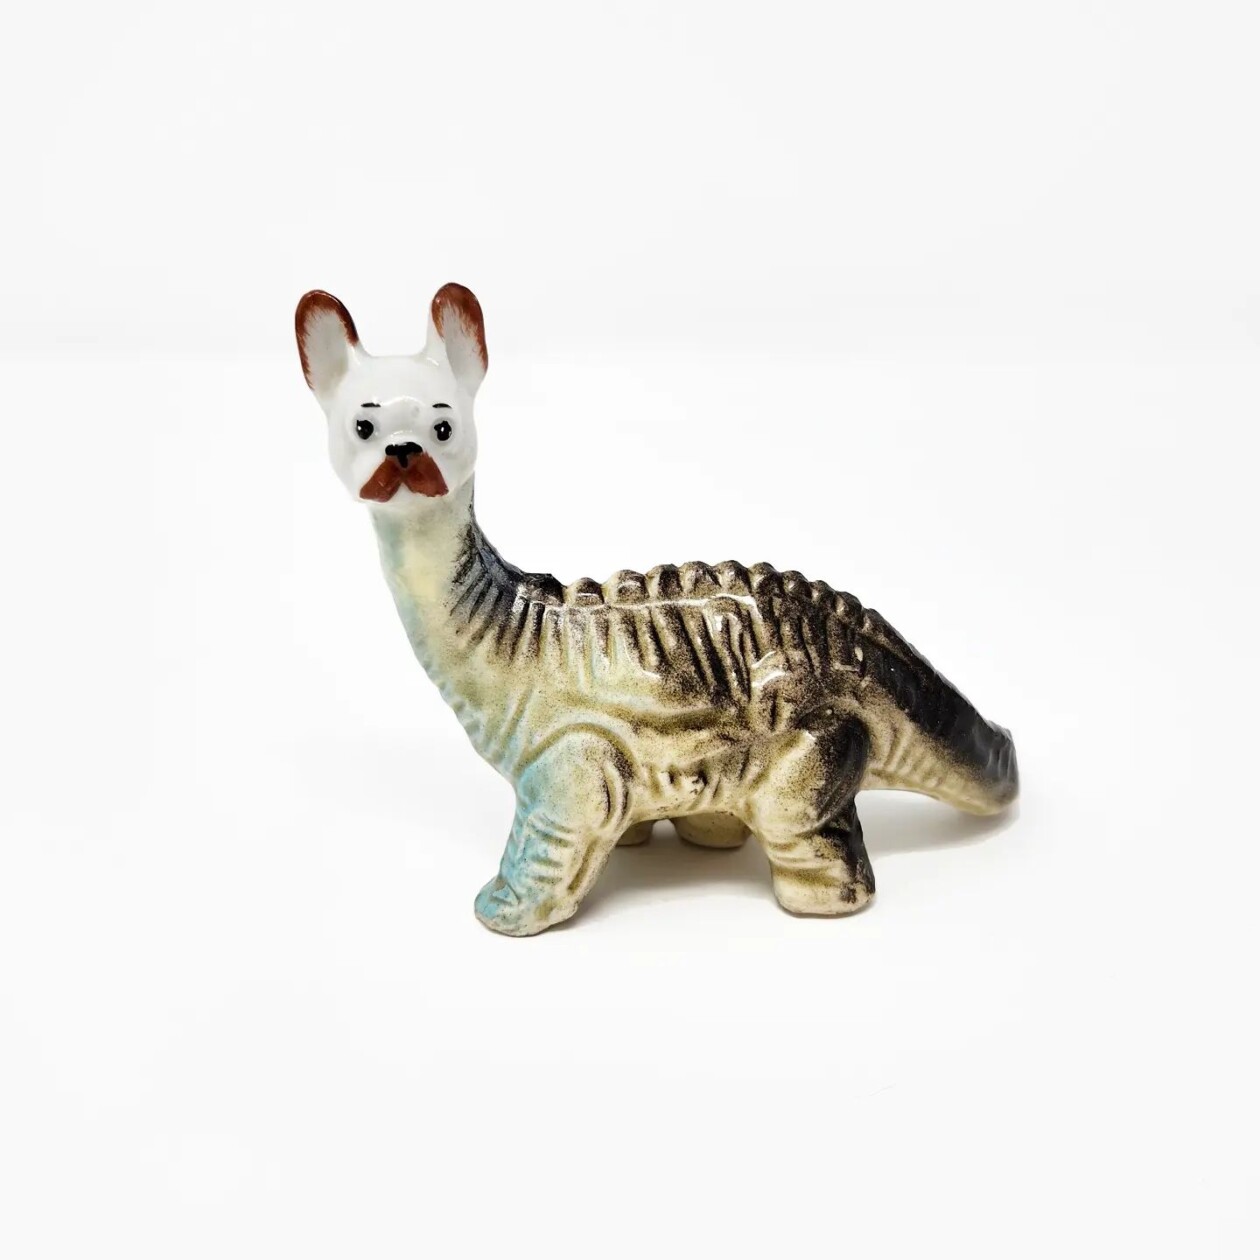 Debra Broz Brings To Life Uncanny Beings By Creating Unexpected Mashups Between Animals, Plants, And Humans (8)